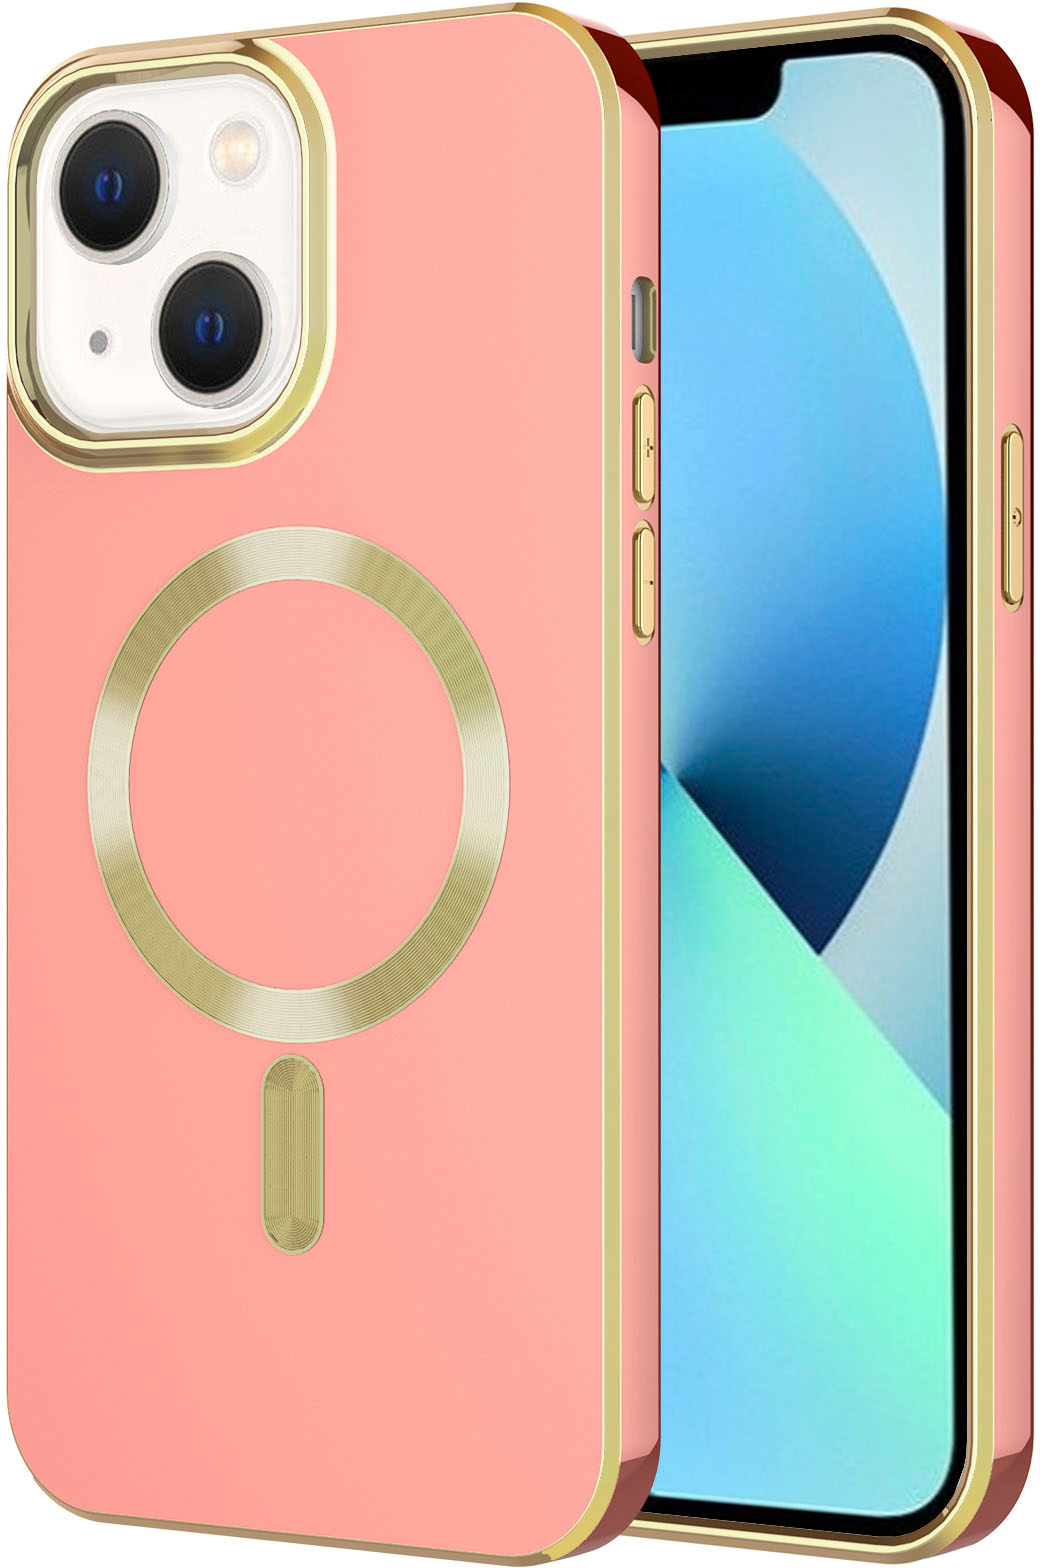 Ampd - Gold Bumper Soft Case with MagSafe for Apple iPhone 12 Pro / iPhone 12 - Light Pink